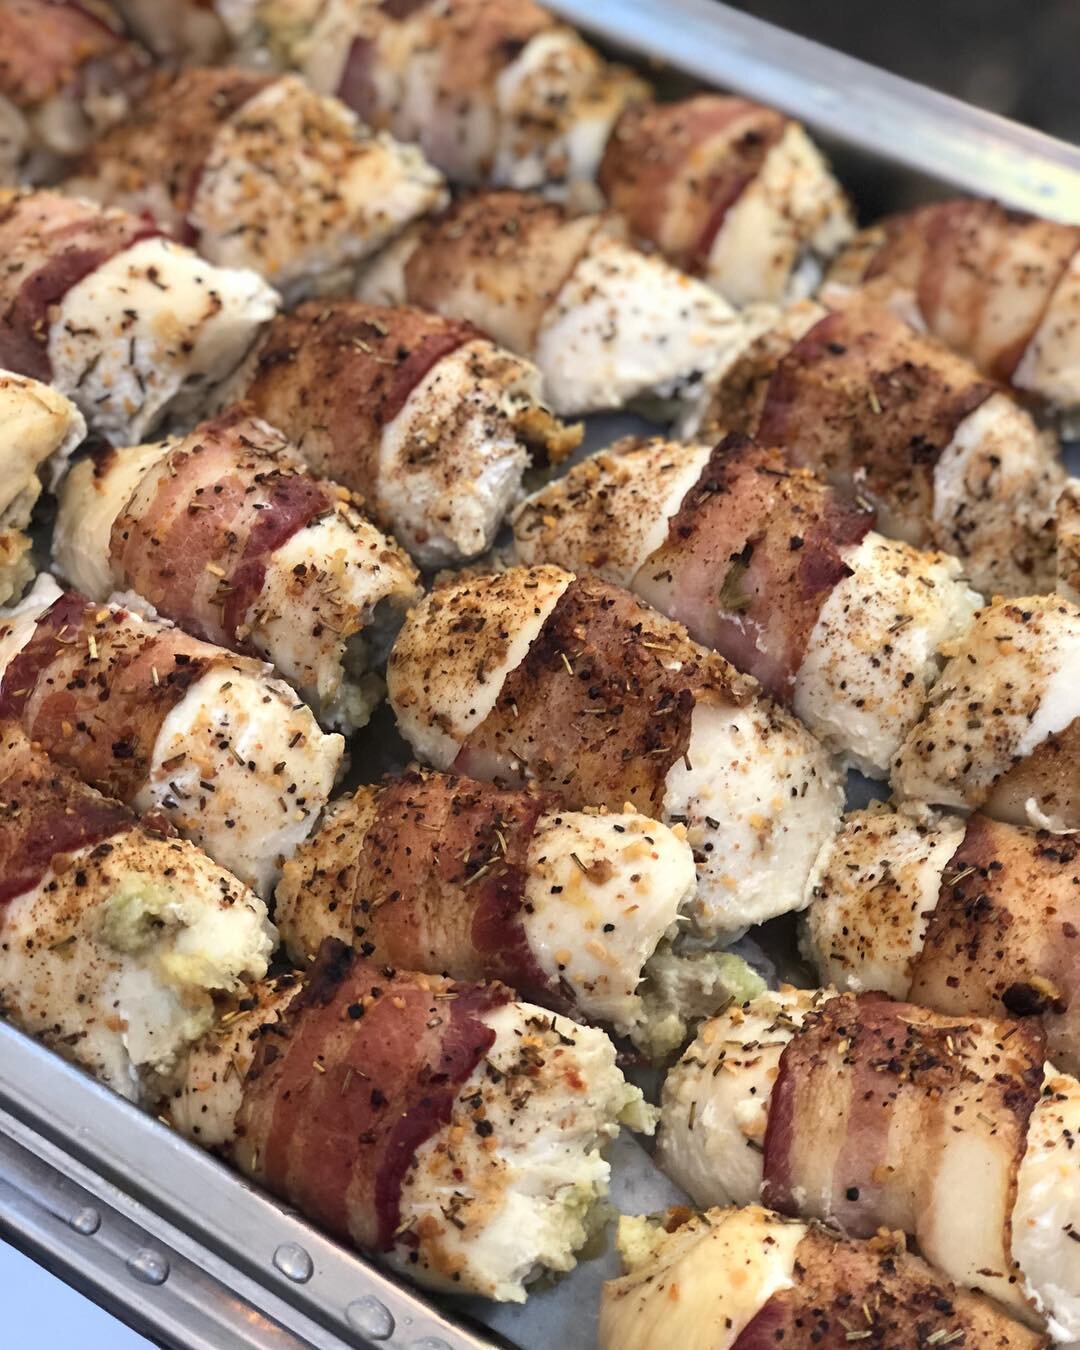 Bacon wrapped, apple cornbread stuffed chicken! Topped with a Parmesan Cream sauce.